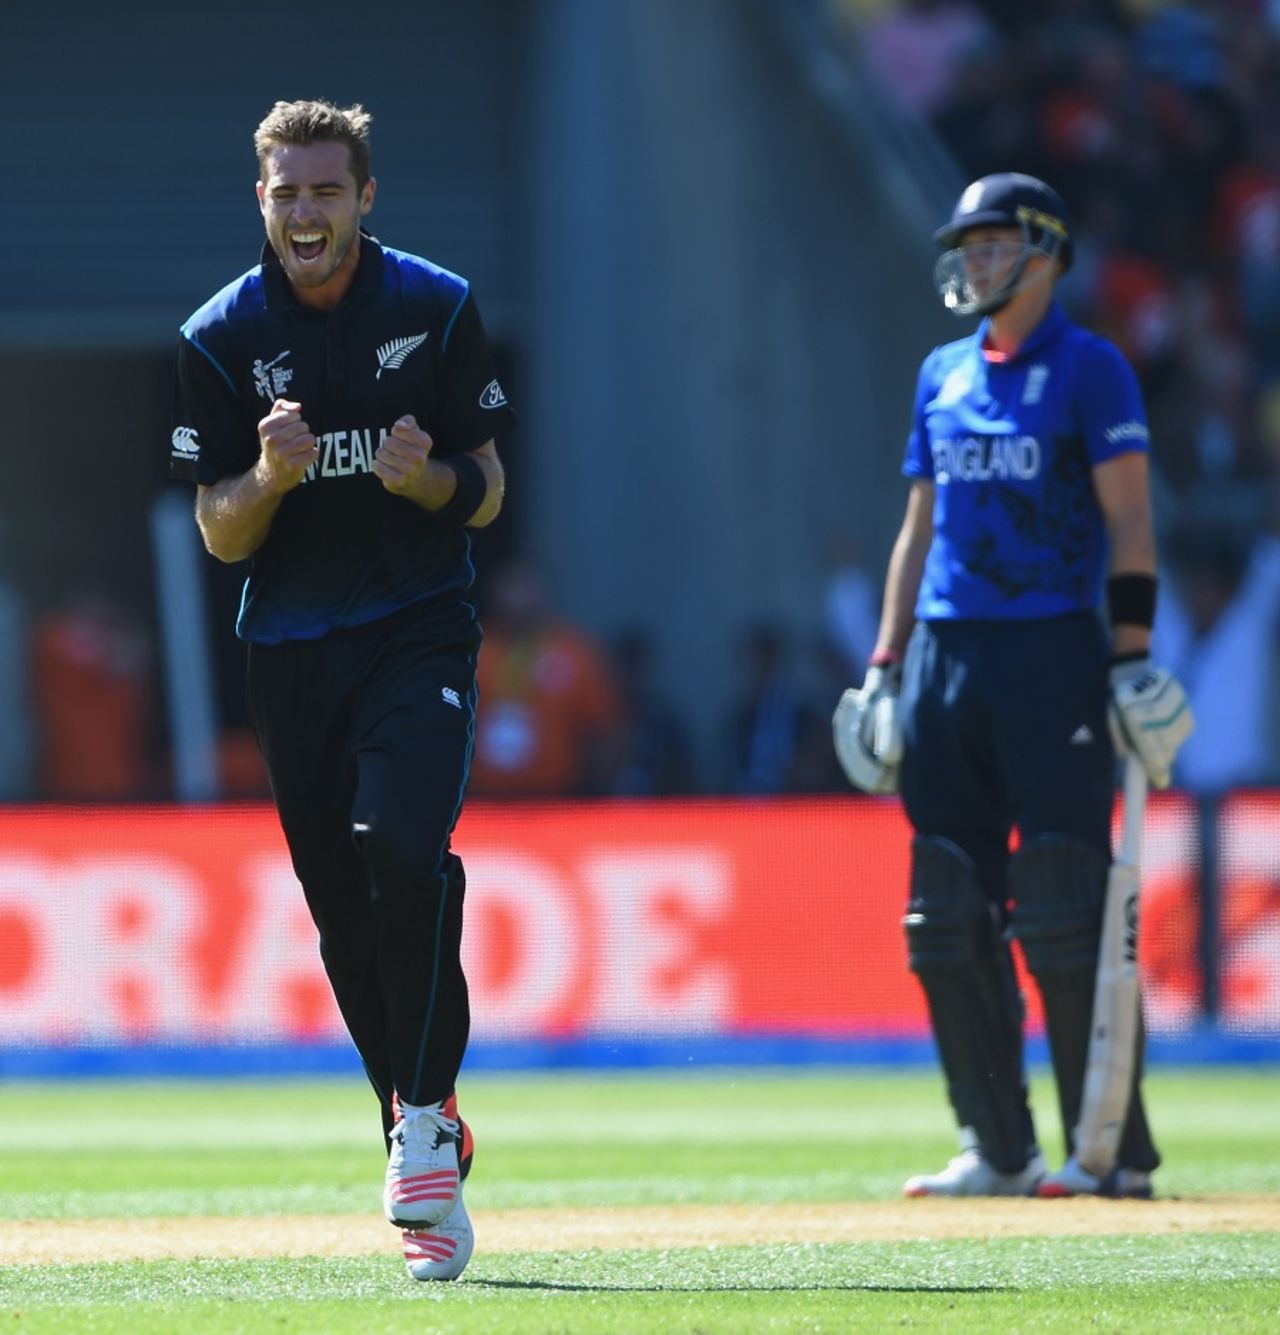 Tim Southee's 7-33 routed England for 123, New Zealand v England, World Cup 2015, Group A, Wellington, February 20, 2015